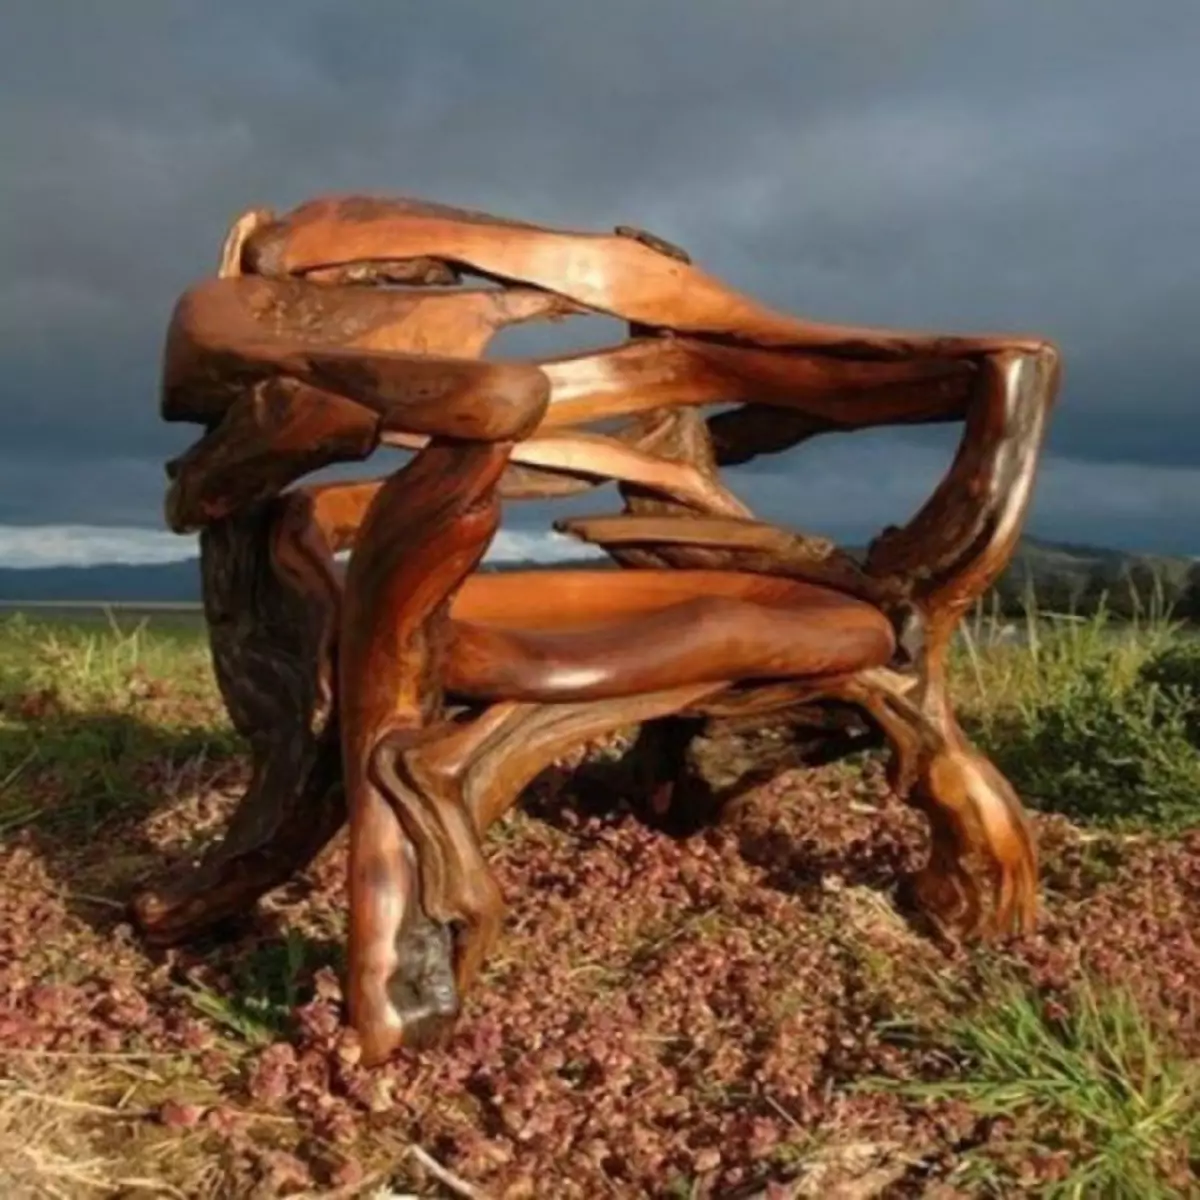 Garden furniture from wood, branches, hemp and coriation (25 photos)